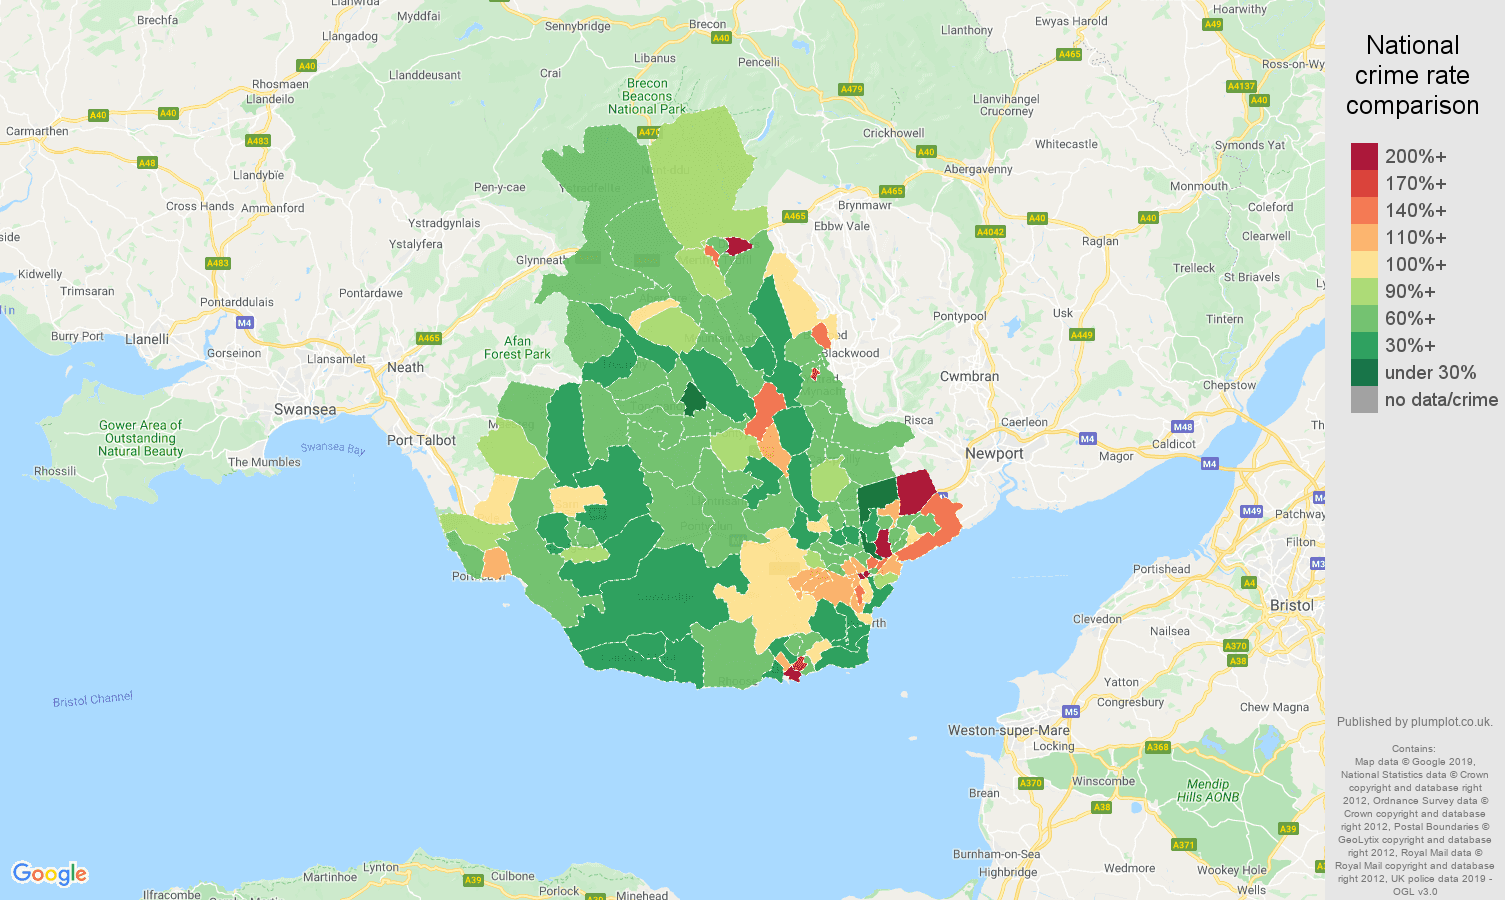 Cardiff other theft crime rate comparison map